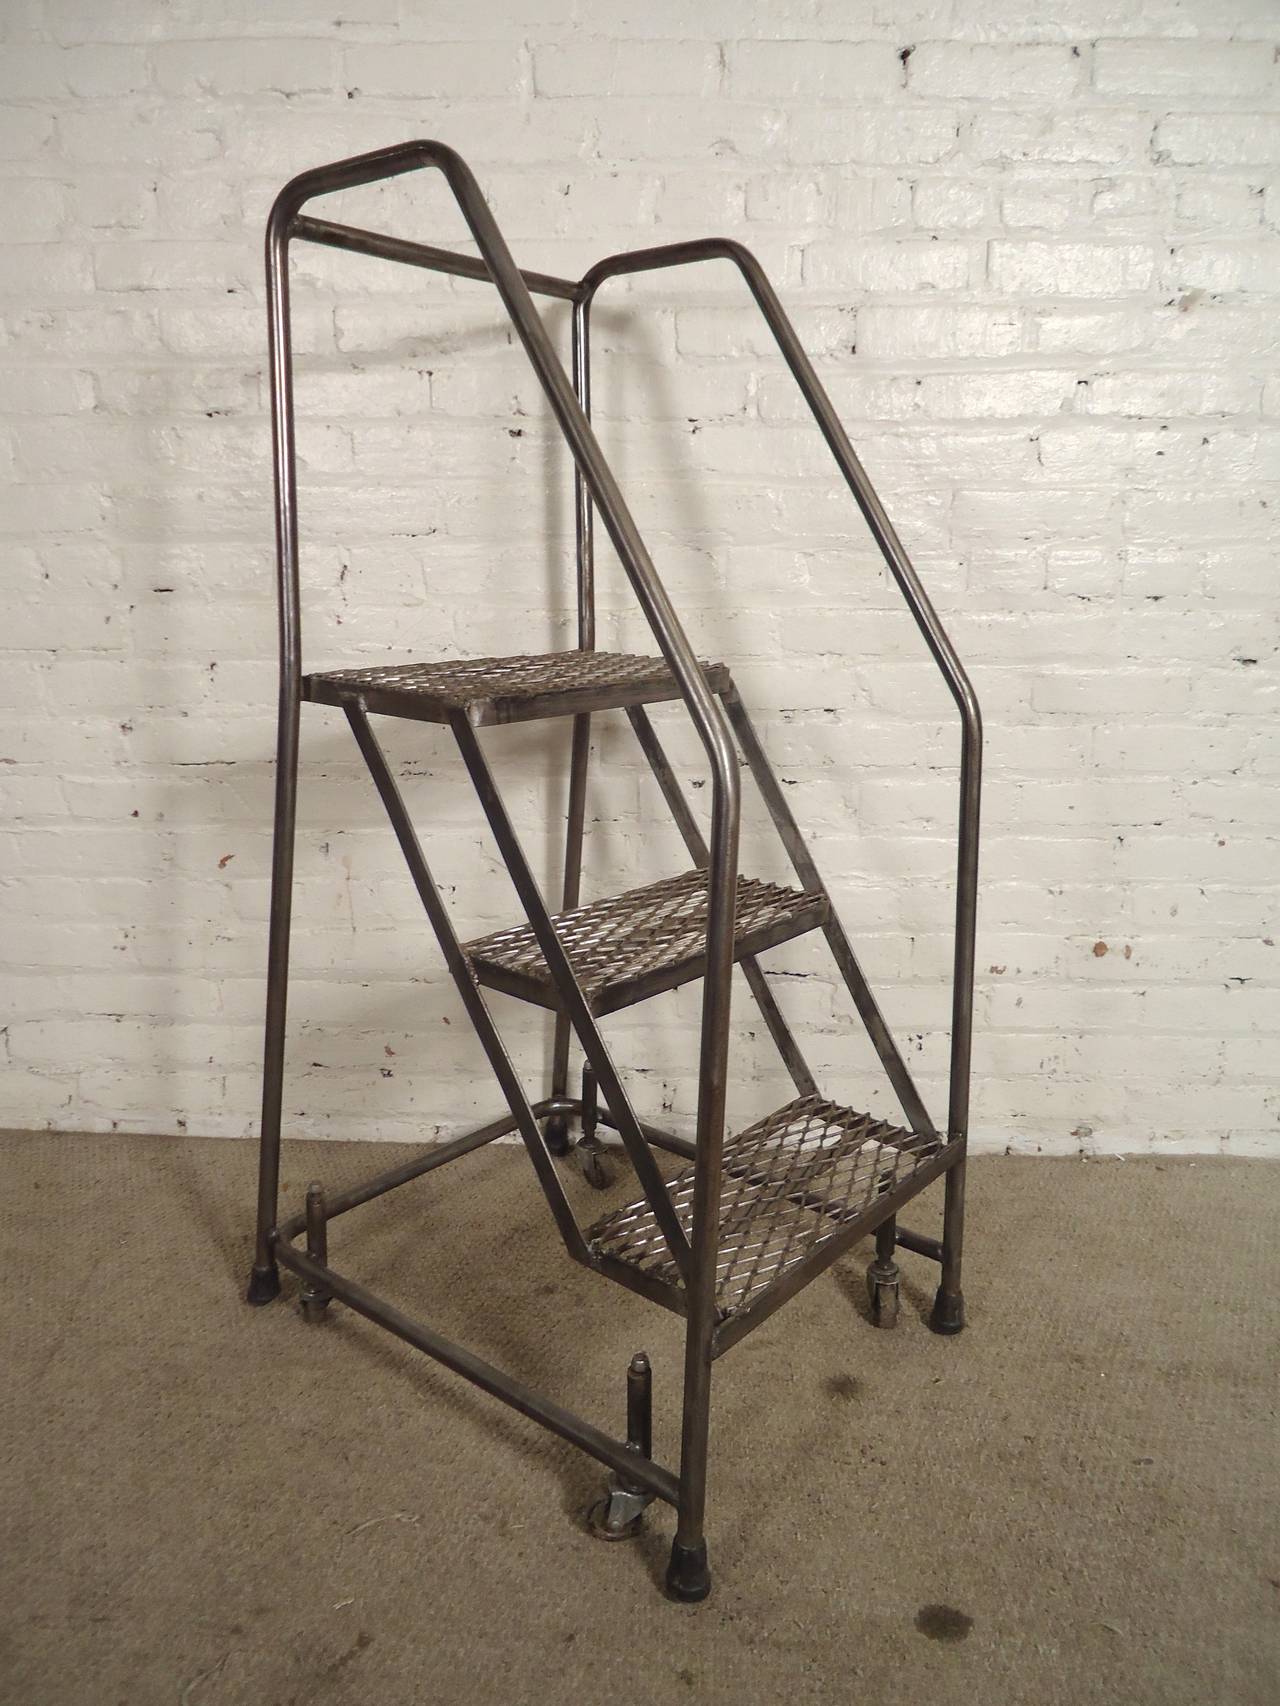 Refinished factory ladder, restored in a bare metal style. Great for high lofts and libraries. Mesh metal steps, 360 degree casters, strong handrails and locking mechanism.

(Please confirm item location - NY or NJ - with dealer)